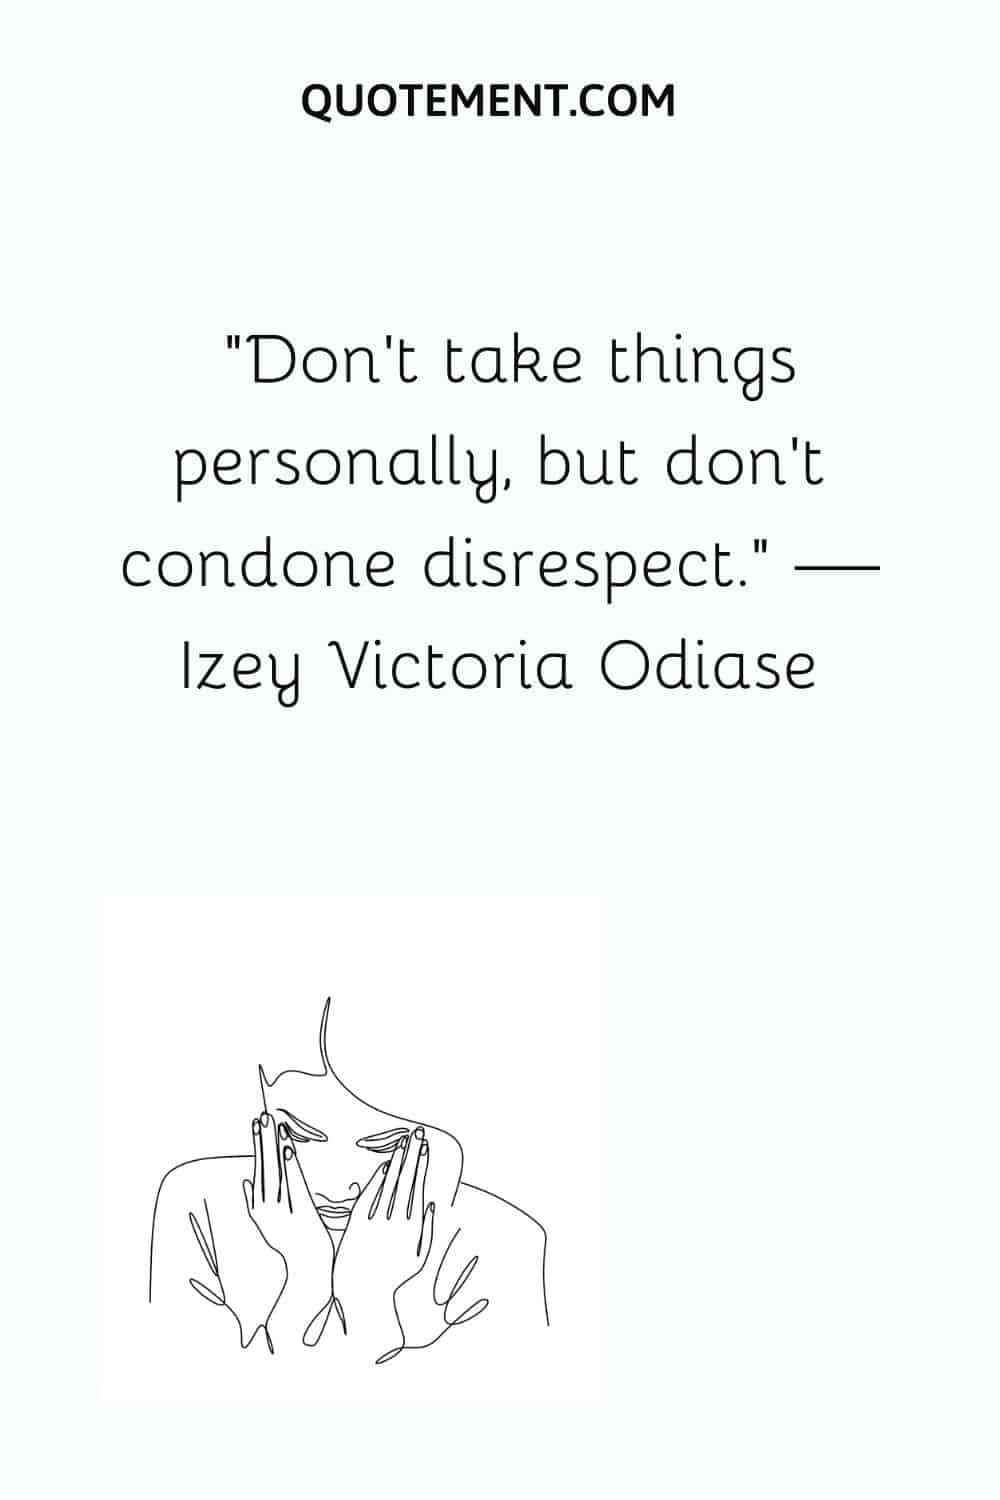 Don’t take things personally, but don’t condone disrespect.